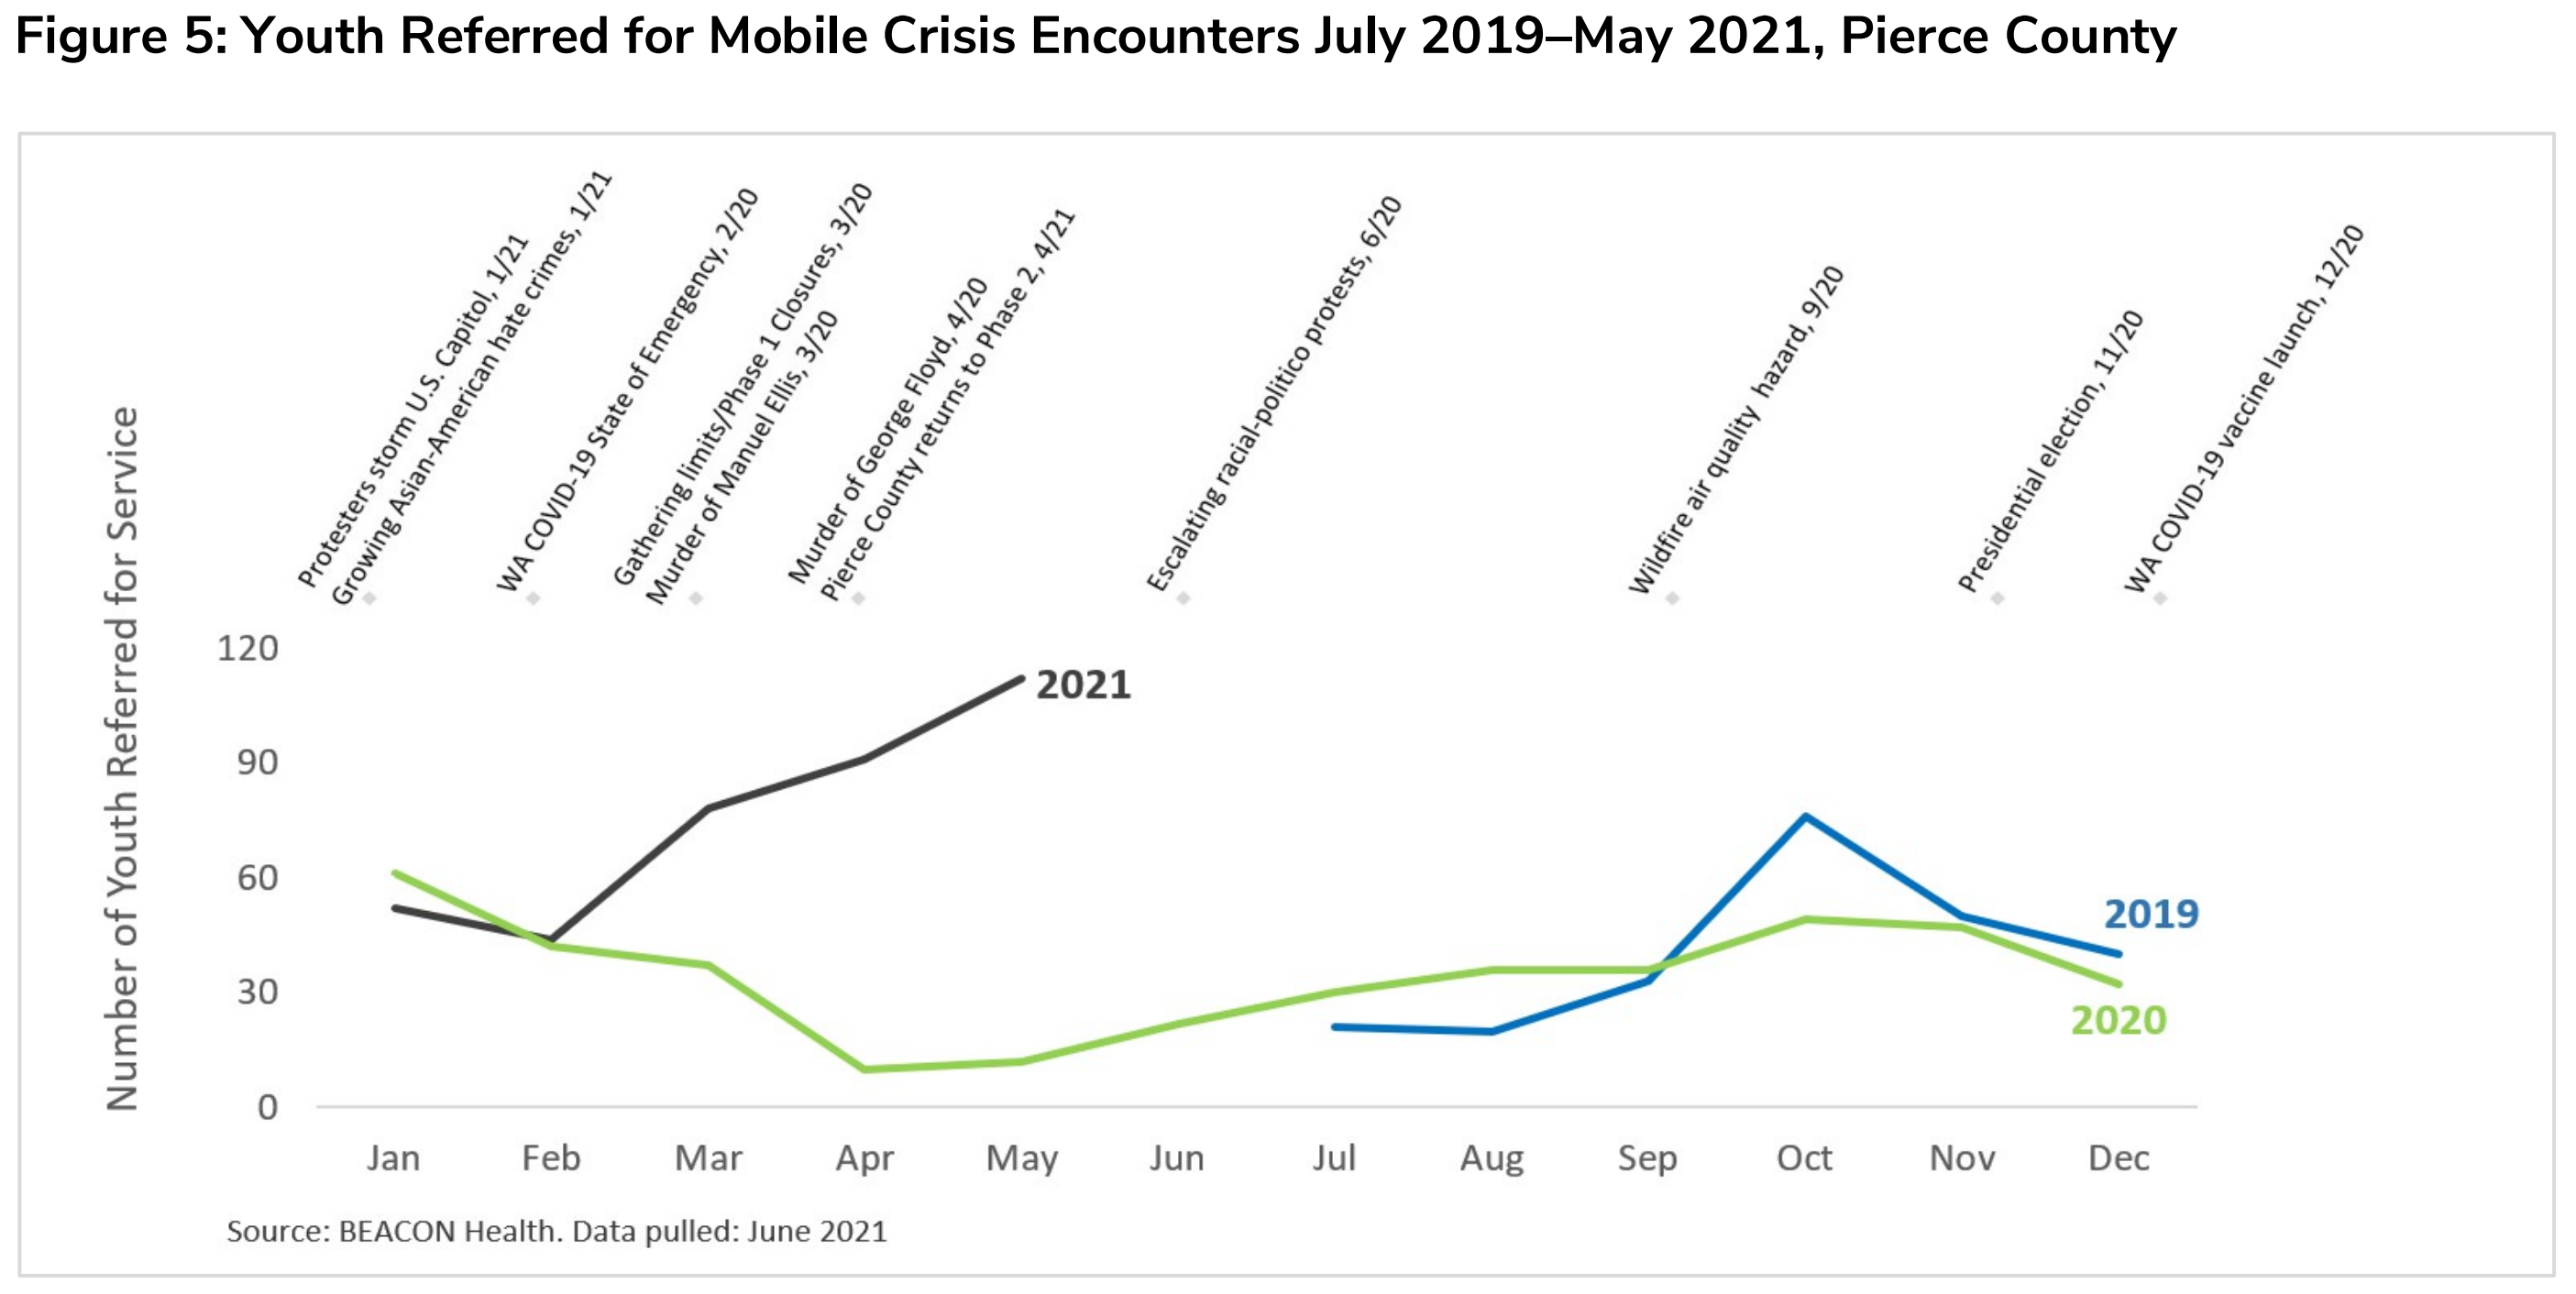 Youth referred for mobile crisis encounters in Pierce County, July 2019-May 2021. The number of youths referred for mobile crisis encounters through Catholic Community Services decreased at the pandemic’s start. Youth referrals increased steadily since April 2020, with a dramatic rise above prior-year levels starting March 2021. Graphic: TPCHD